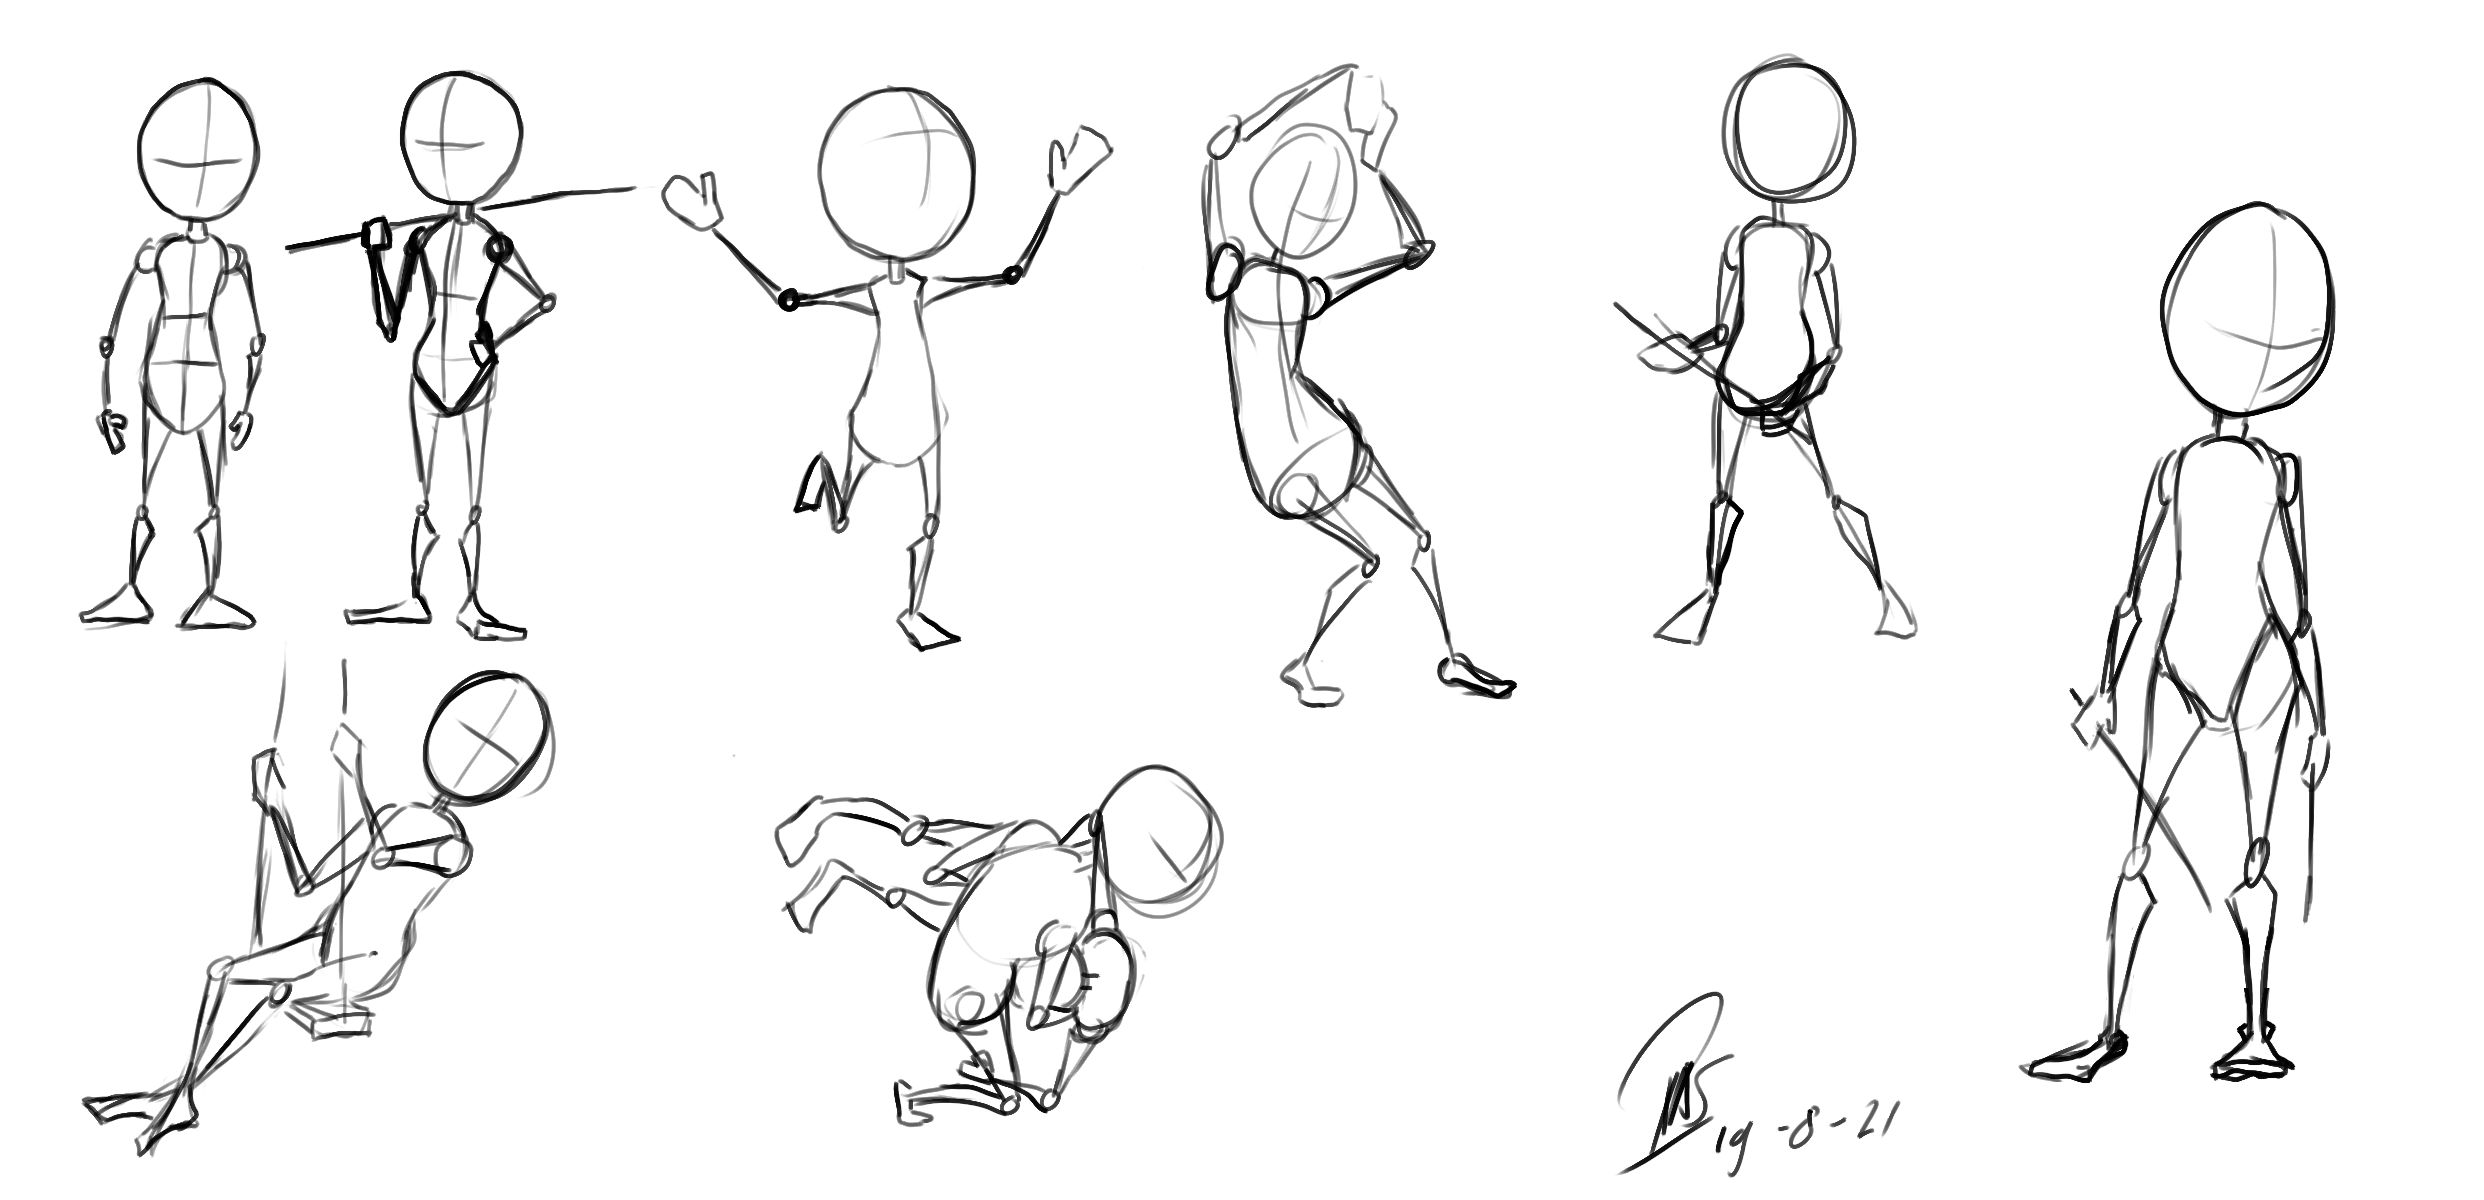 Drawing back poses can be tricky, so here's a quick breakdown of the basic  stages of this type of pose. Watch my full tutorials for more... | Instagram